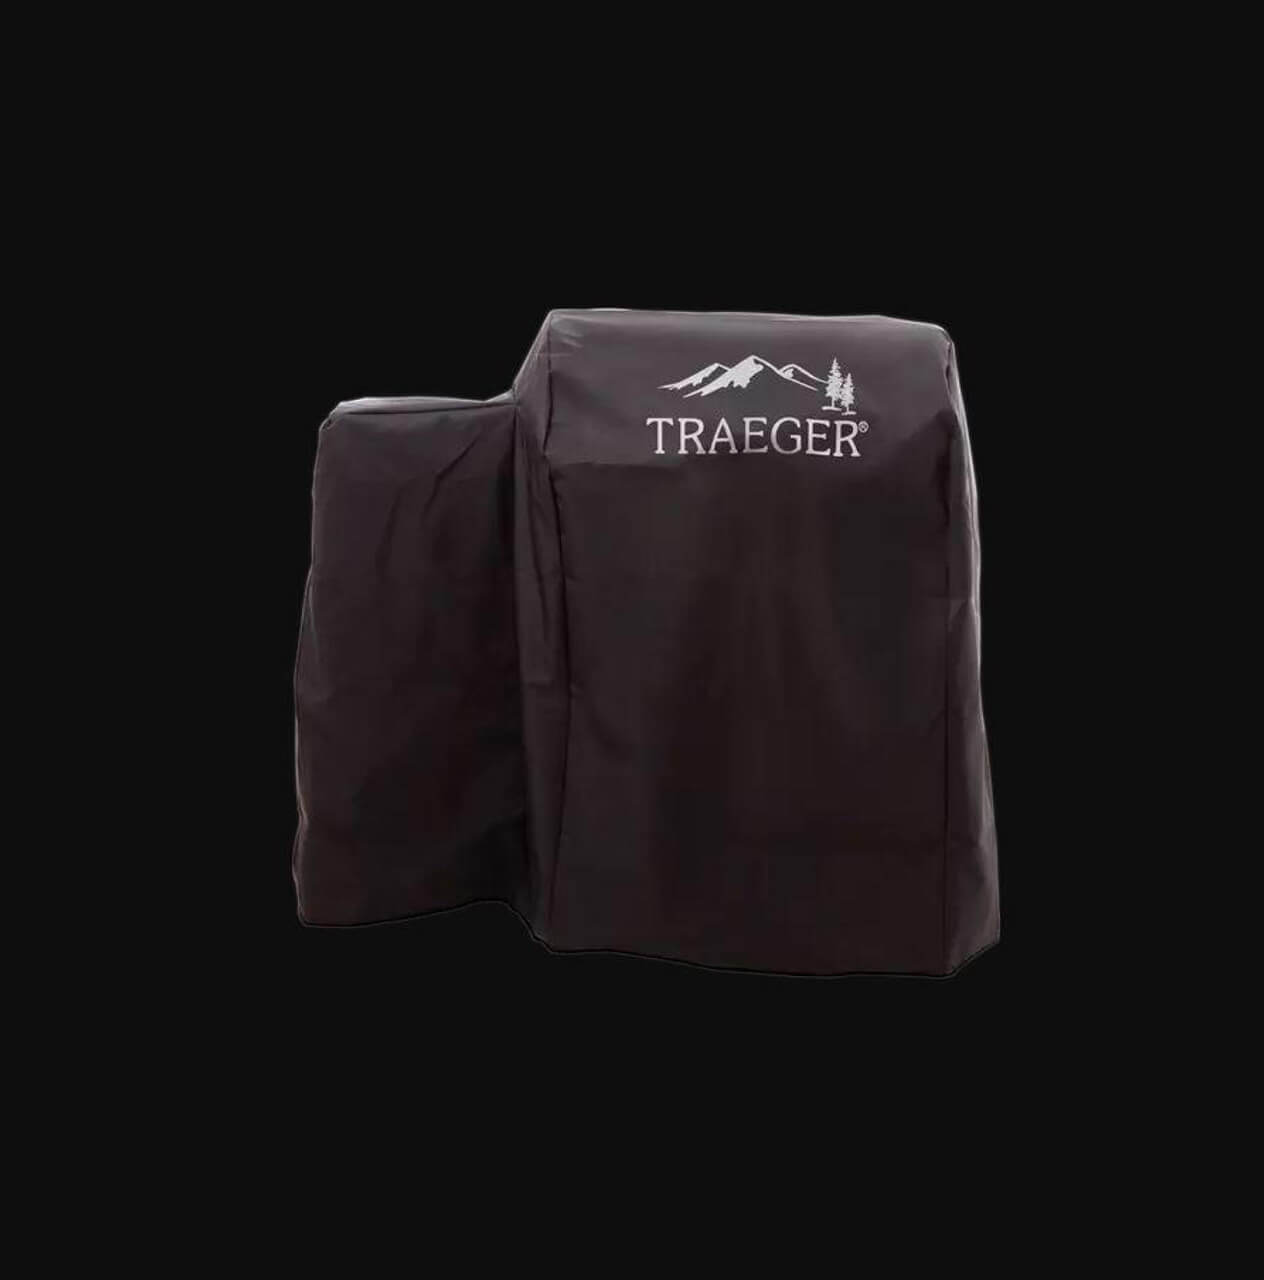 Traeger Grills black grill cover